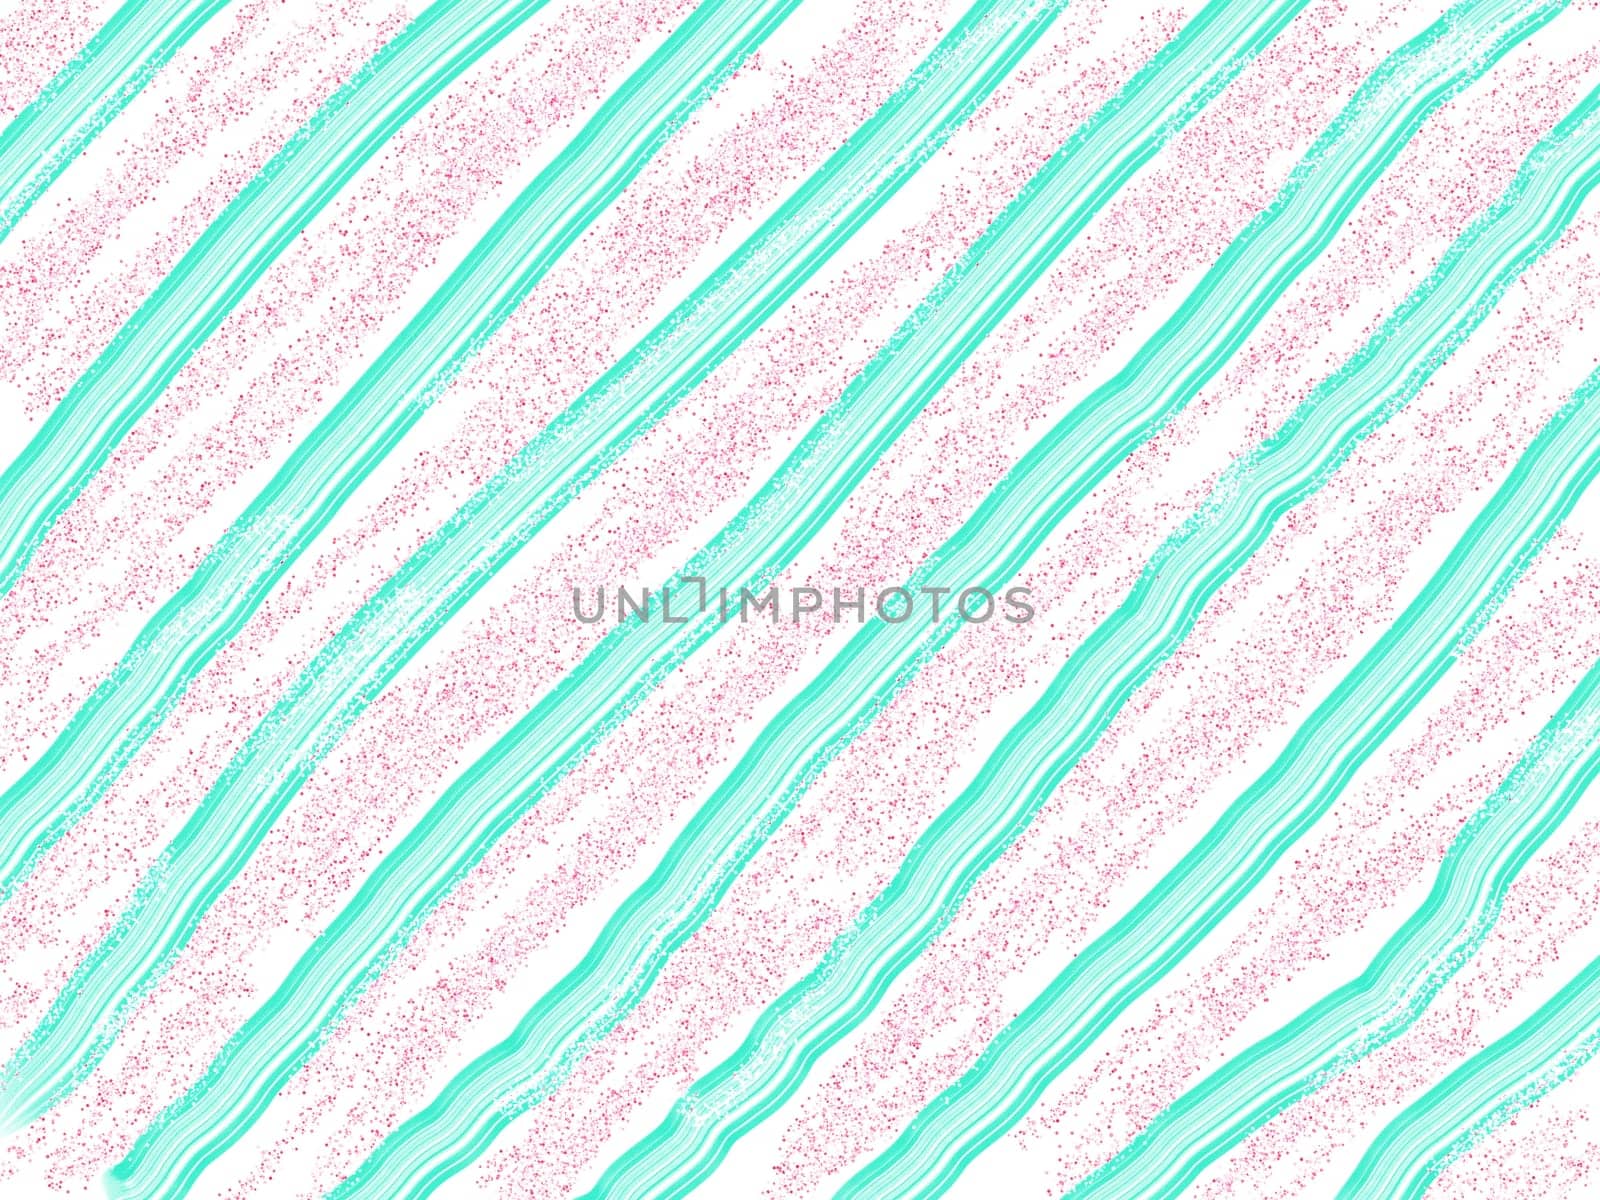 Colorful stripes across white background abstract wallpaper . High quality illustration